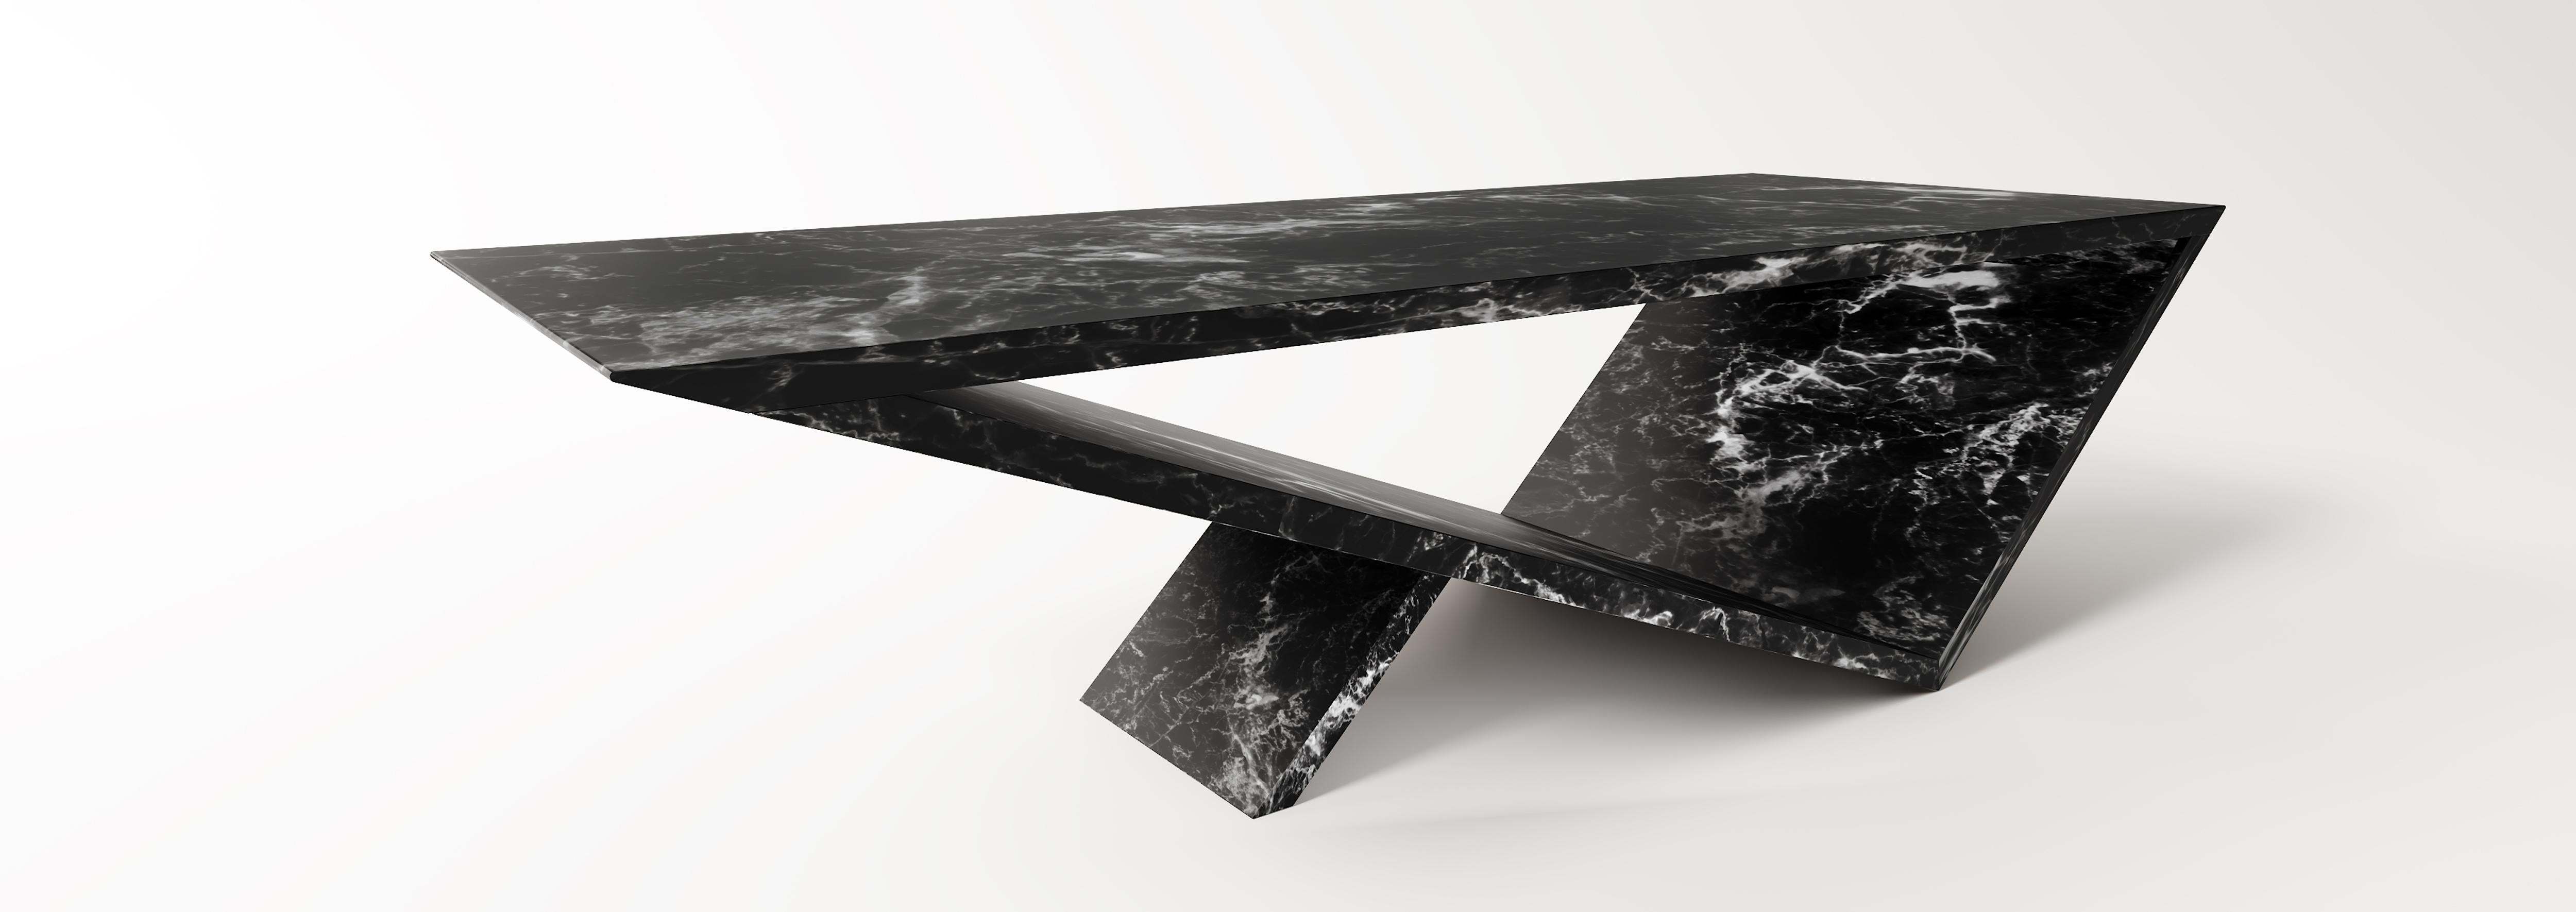 Time/space portal coffee table in black soapstone by Neal Aronowitz Design
Dimensions: D 167.7 x W 63.5 x H 45.7 cm
Materials: Black soapstone.
This table can also be made in other finishes and types of stone.

The inspiration for the